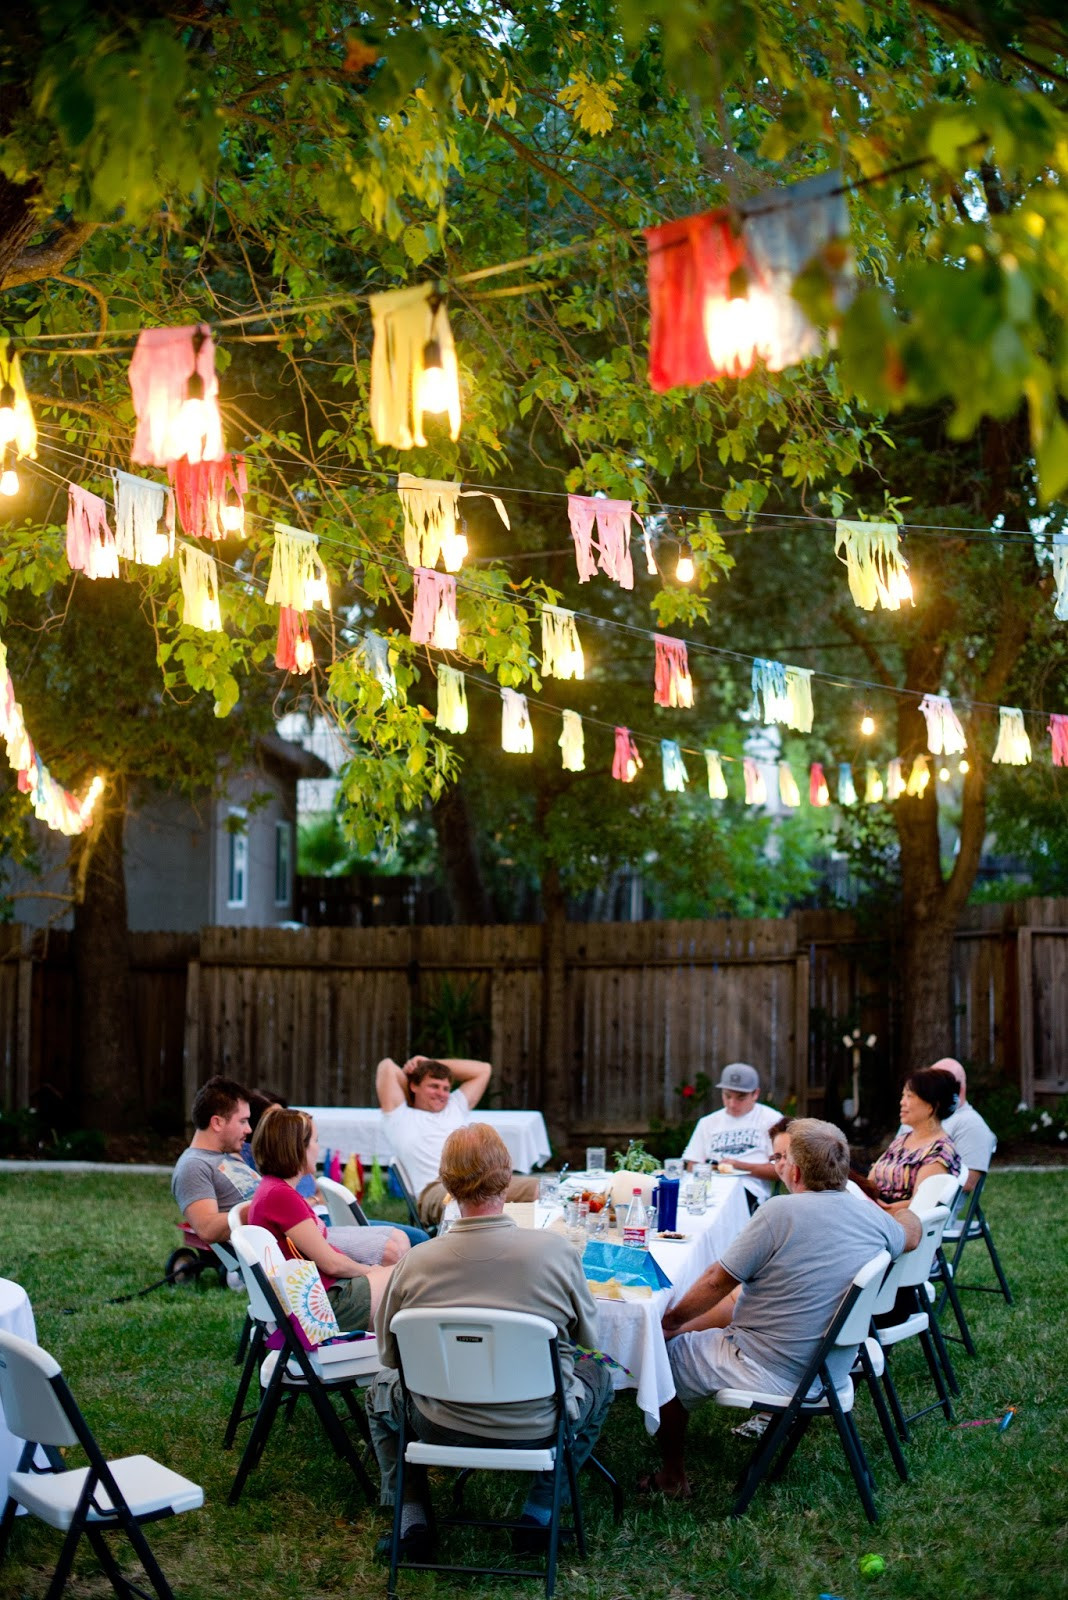 Top 23 Backyard Party Ideas Home, Family, Style and Art Ideas